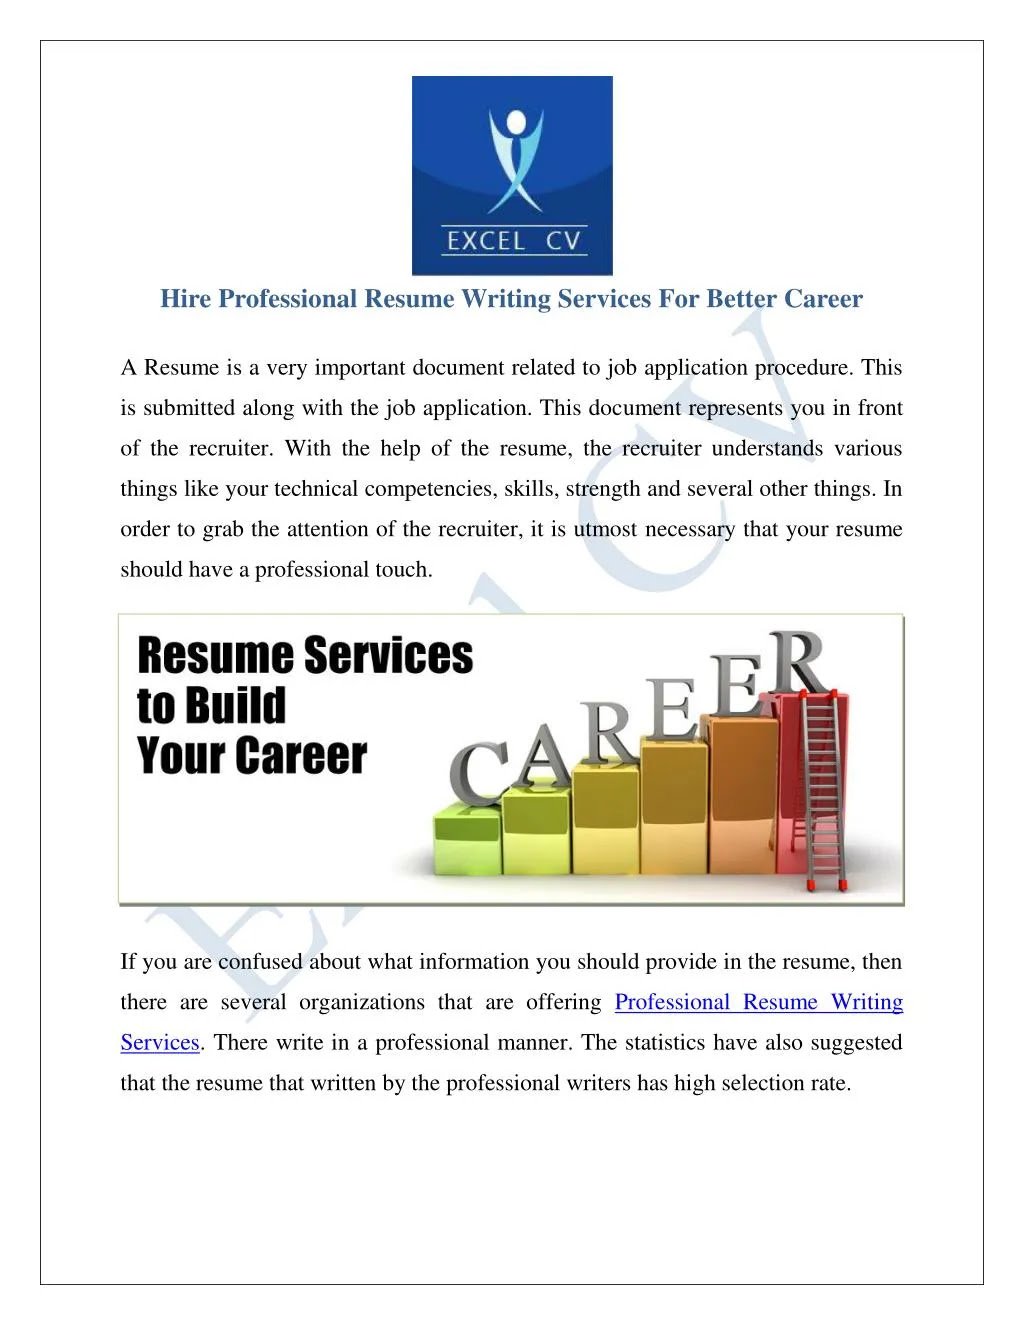 Professional resume services online uoa